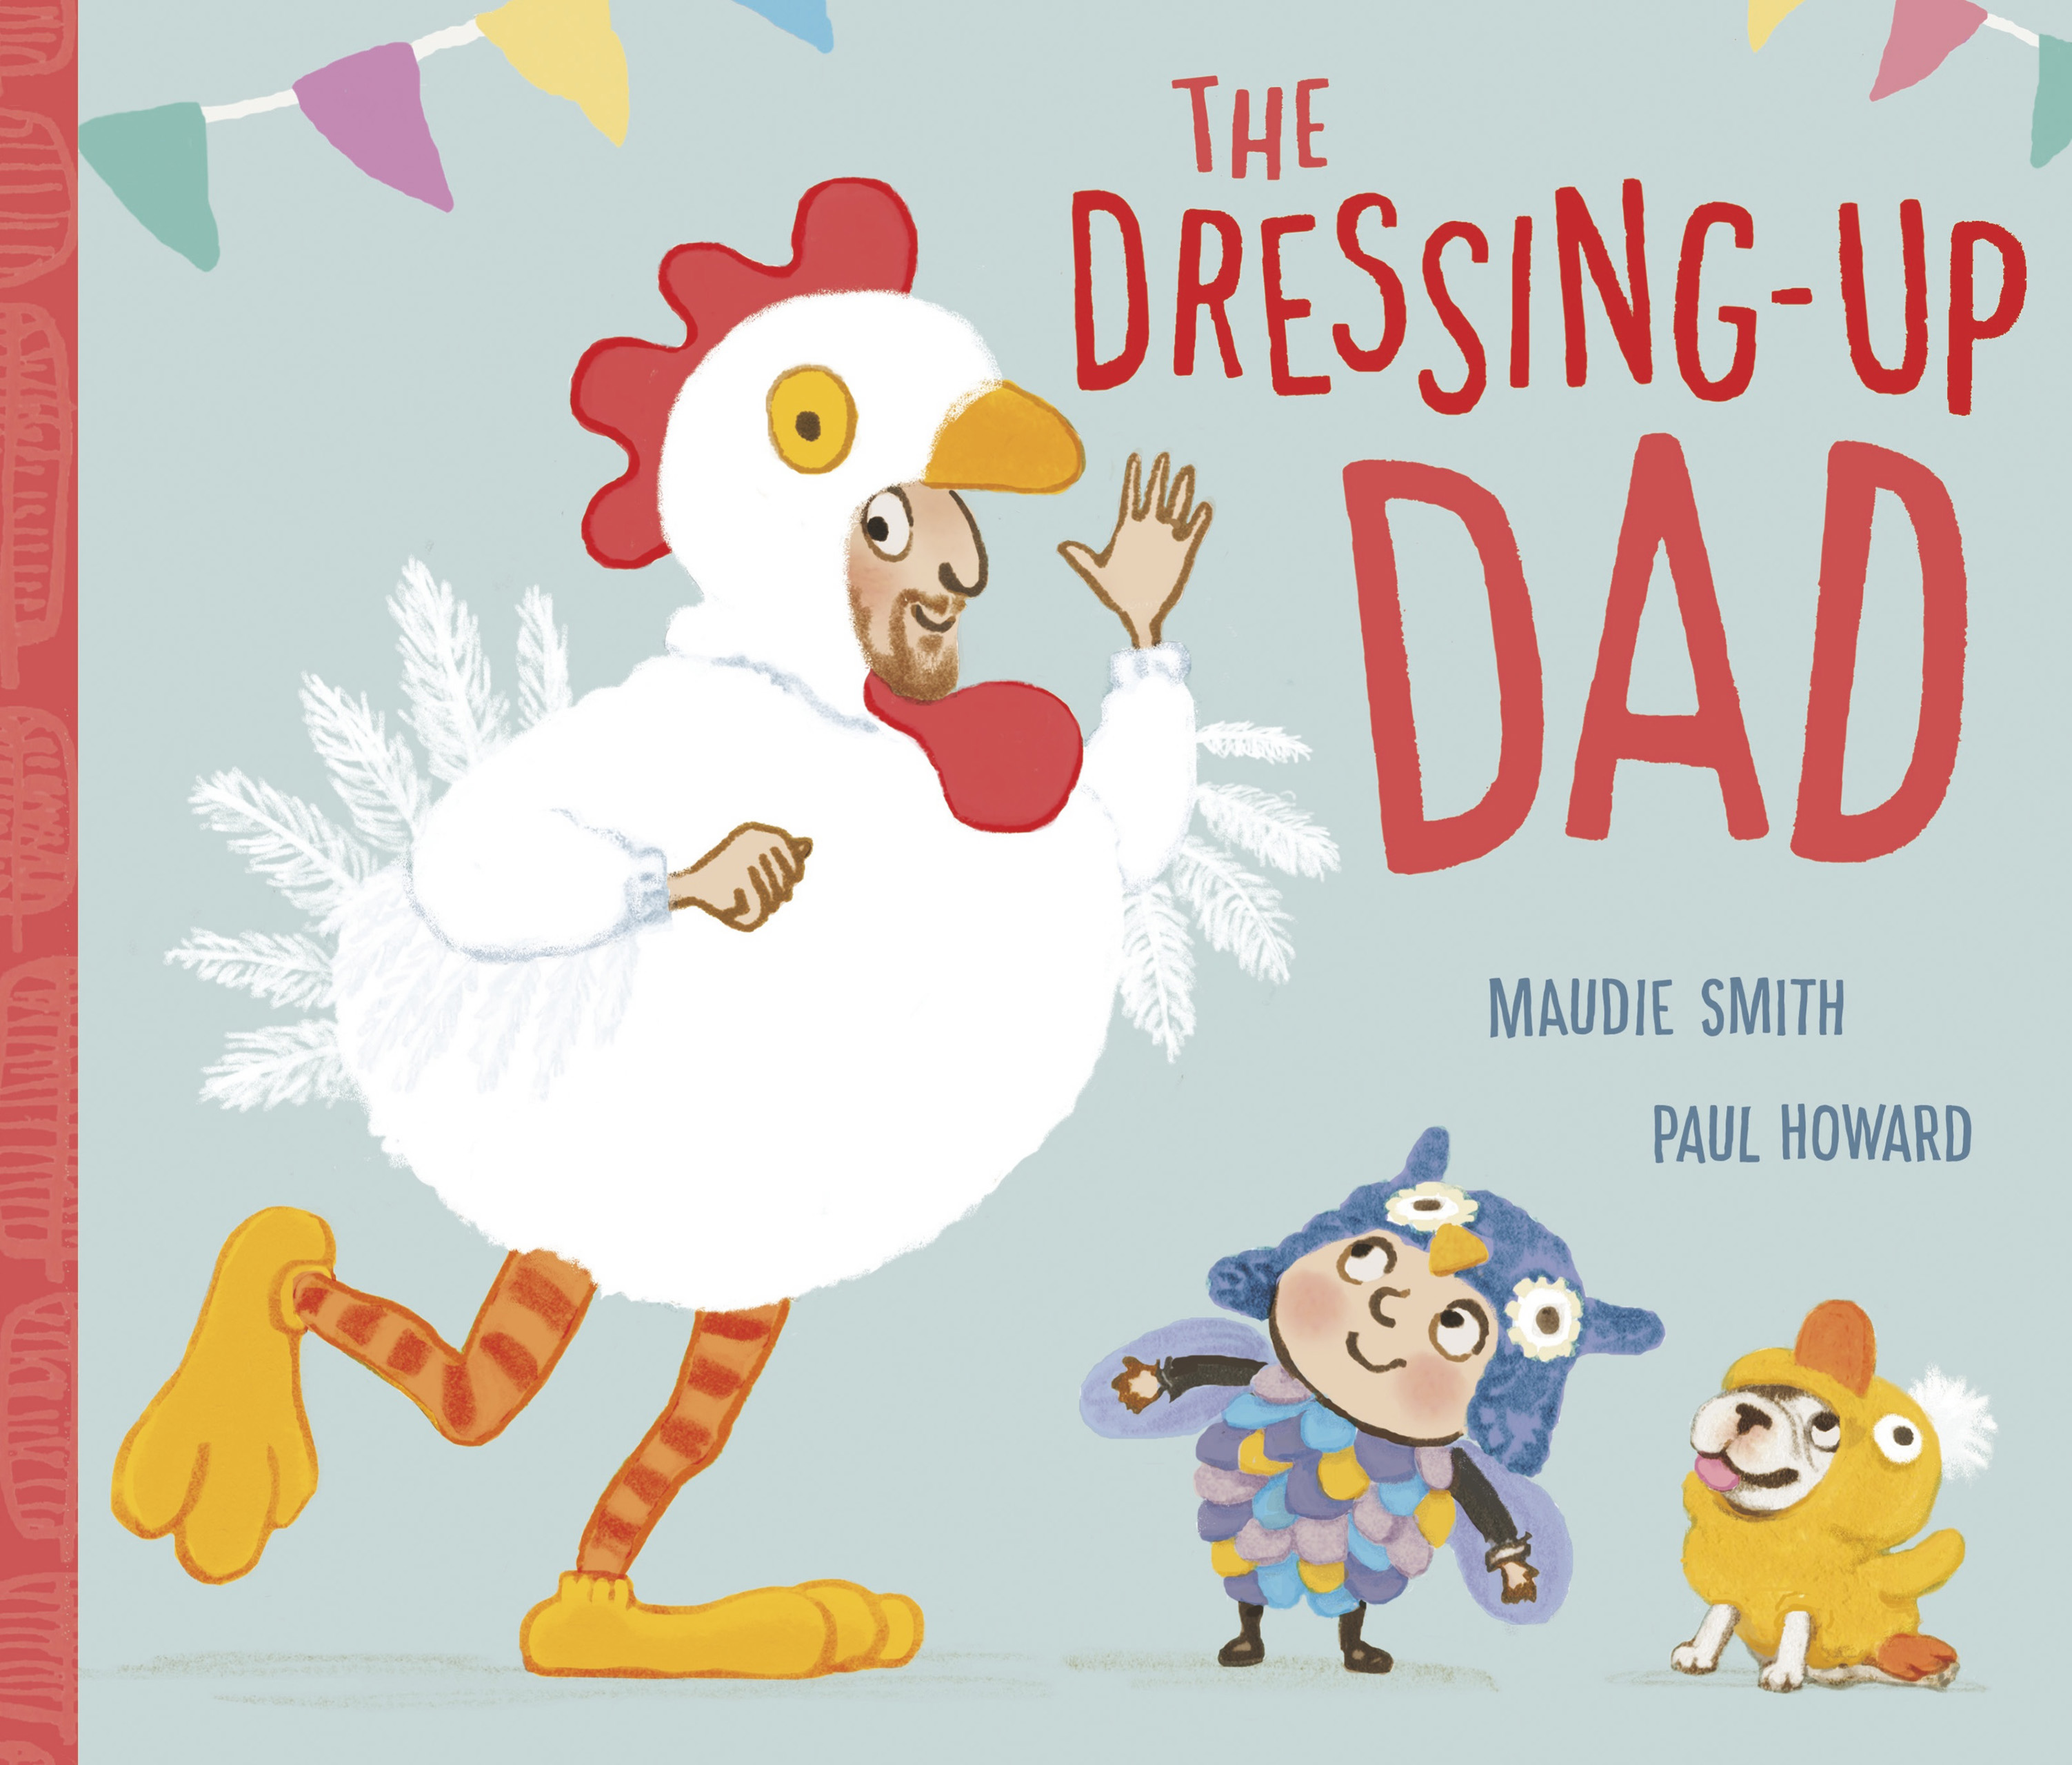 The Dressing-Up Dad